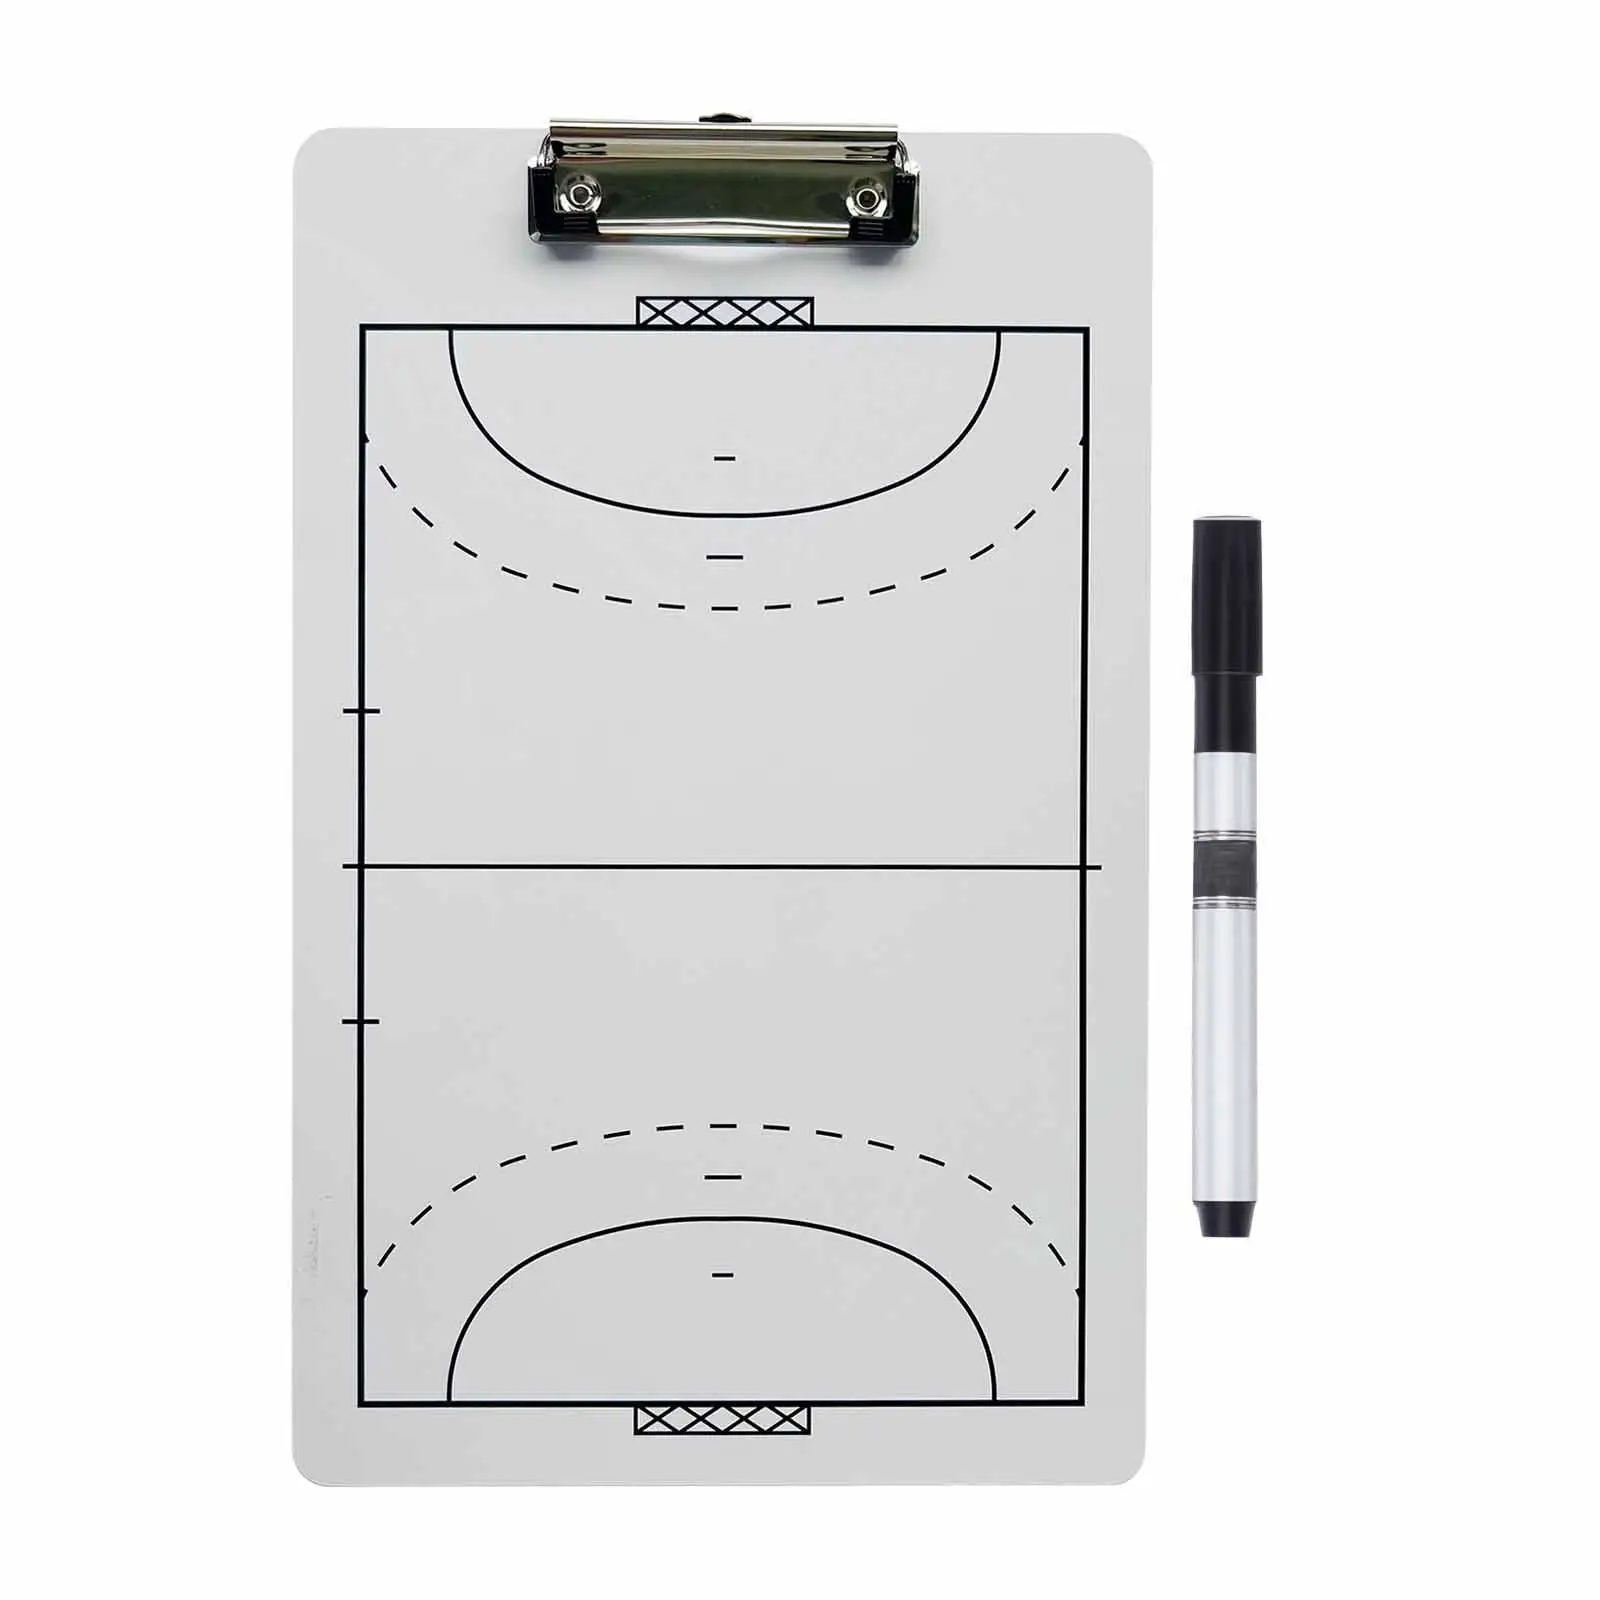 Volleyball Tactic Coaching Boards Guidance Training Aid Practice Board 35x22cm